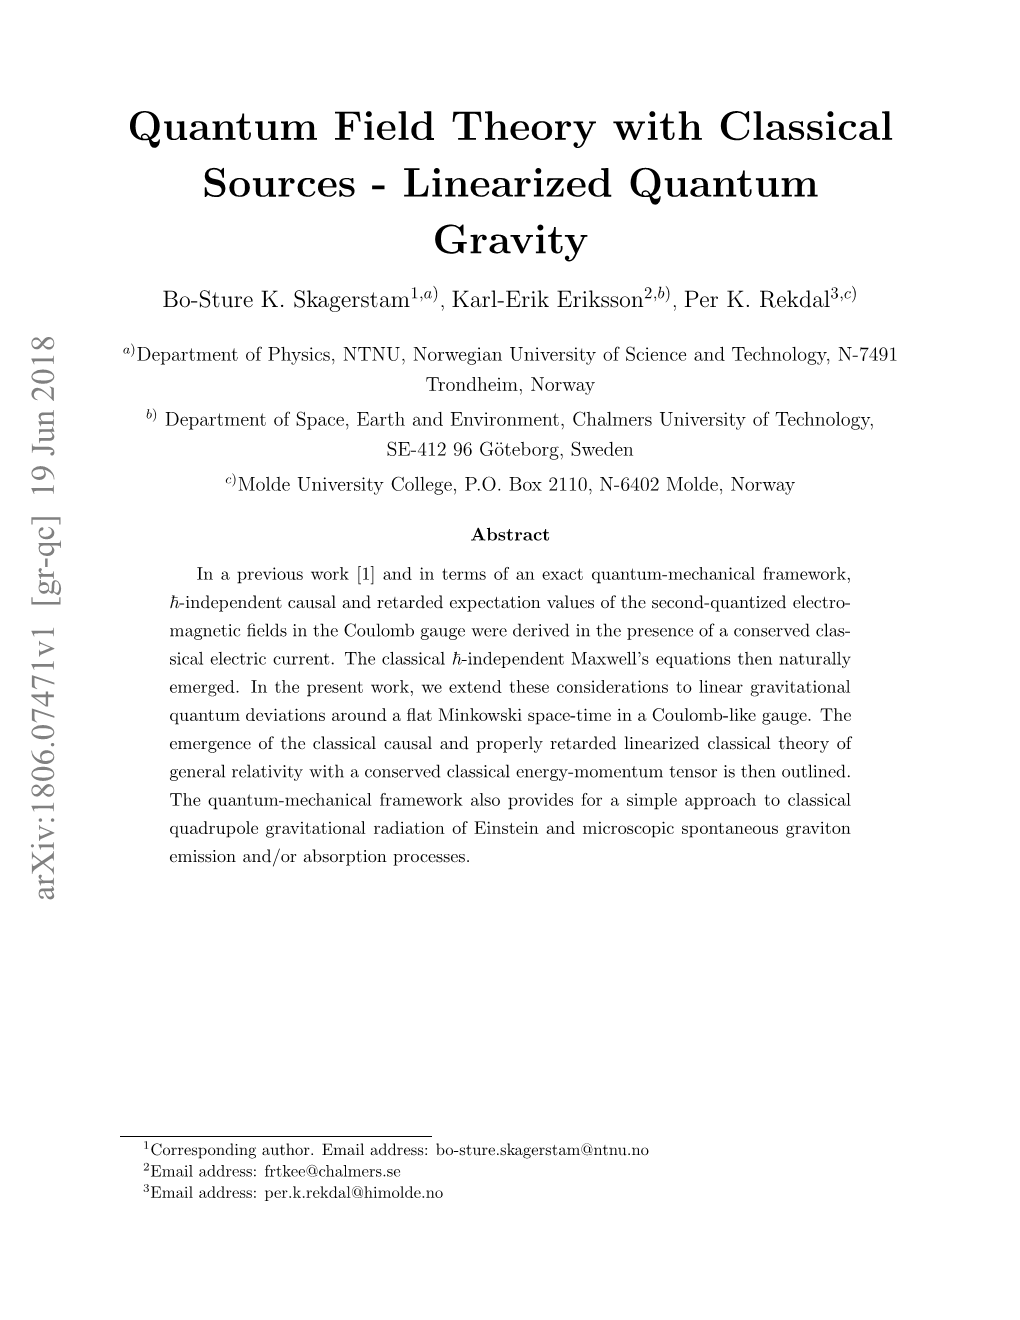 Quantum Field Theory with Classical Sources - Quantum Electrodynamics ”, Arxiv:1801.09947V1 [Quant-Ph] 30 Jan 2018 (Submitted for Publication)